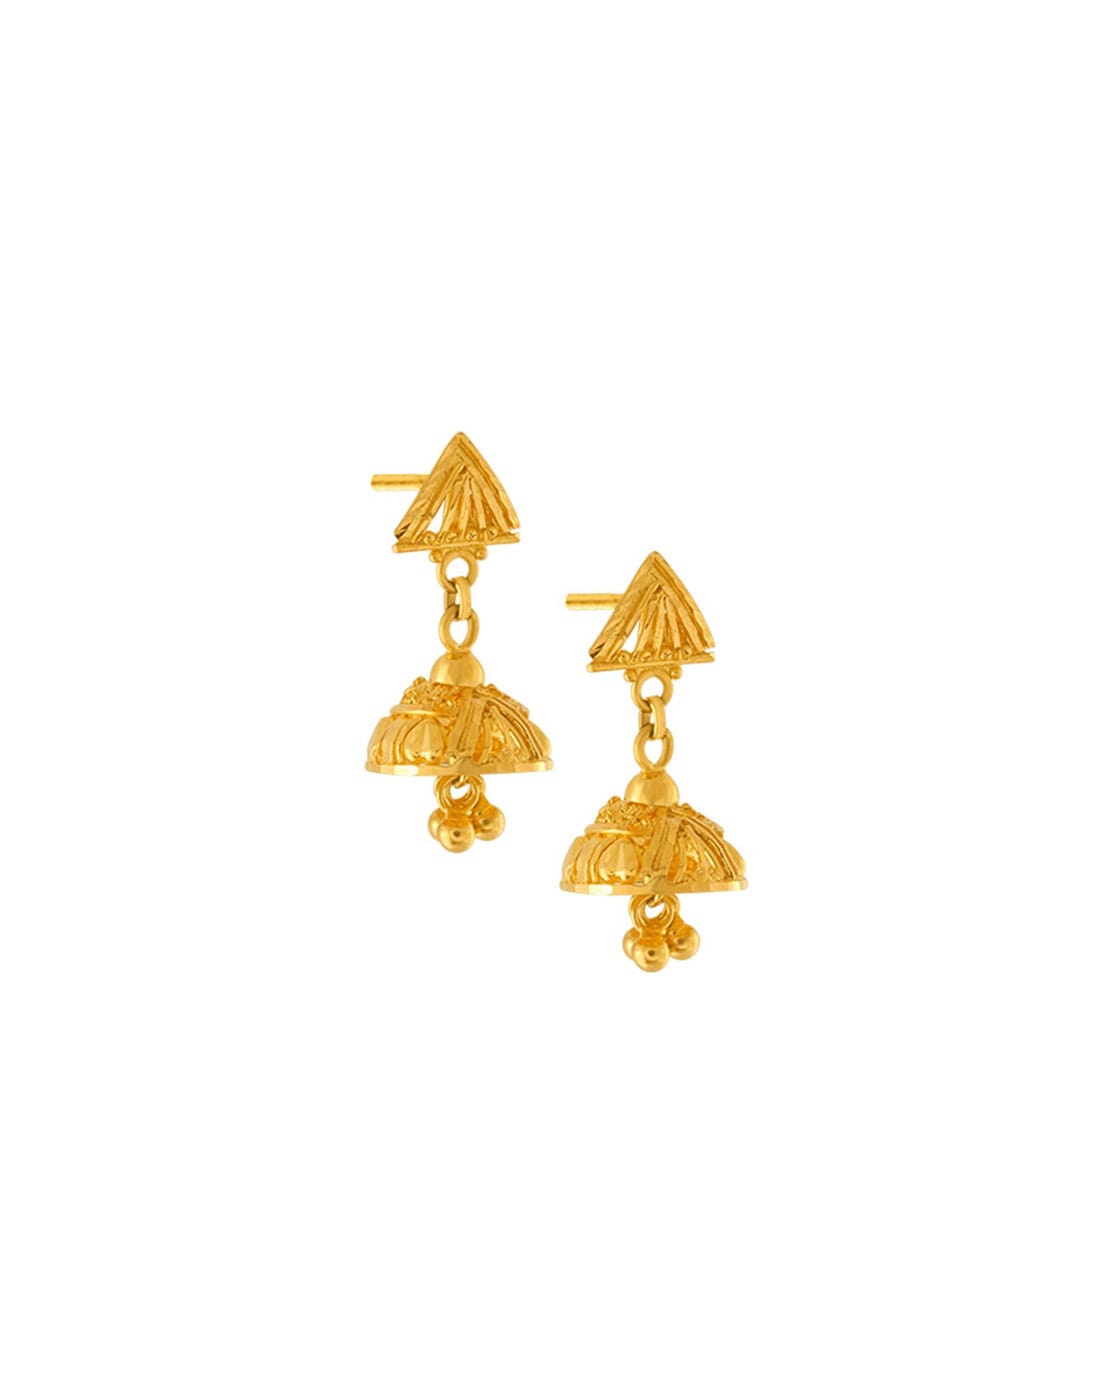 Tanishq Gold Jhumka designs with price | Gold earring designs with weight &  price from Tanishq - YouTube